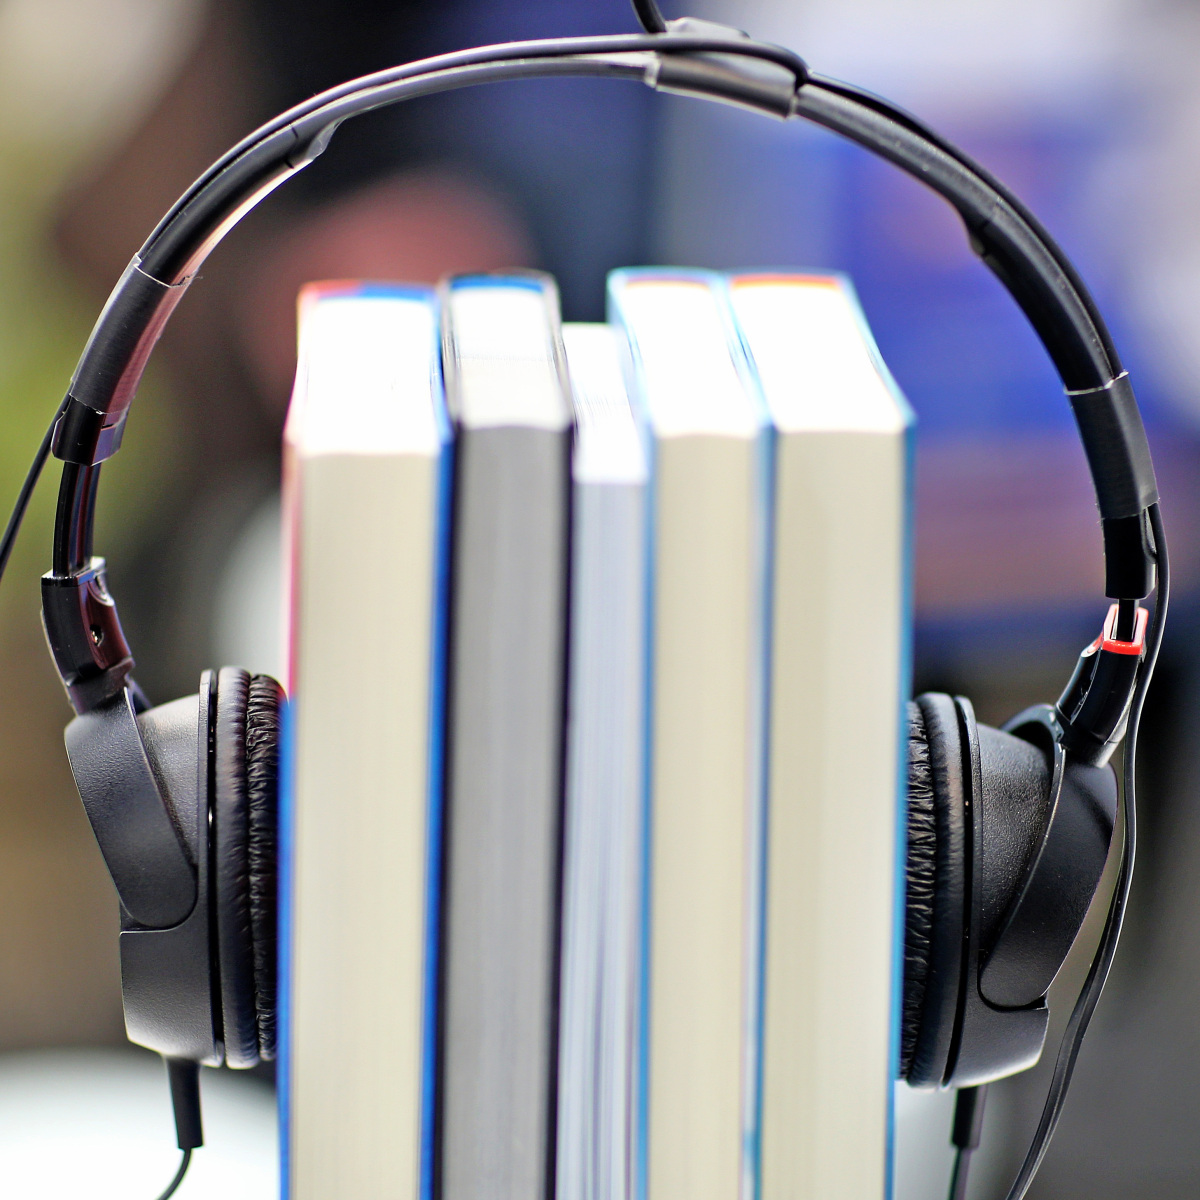 The Complete Guide to Audiobook Downloads: From Selection to Listening